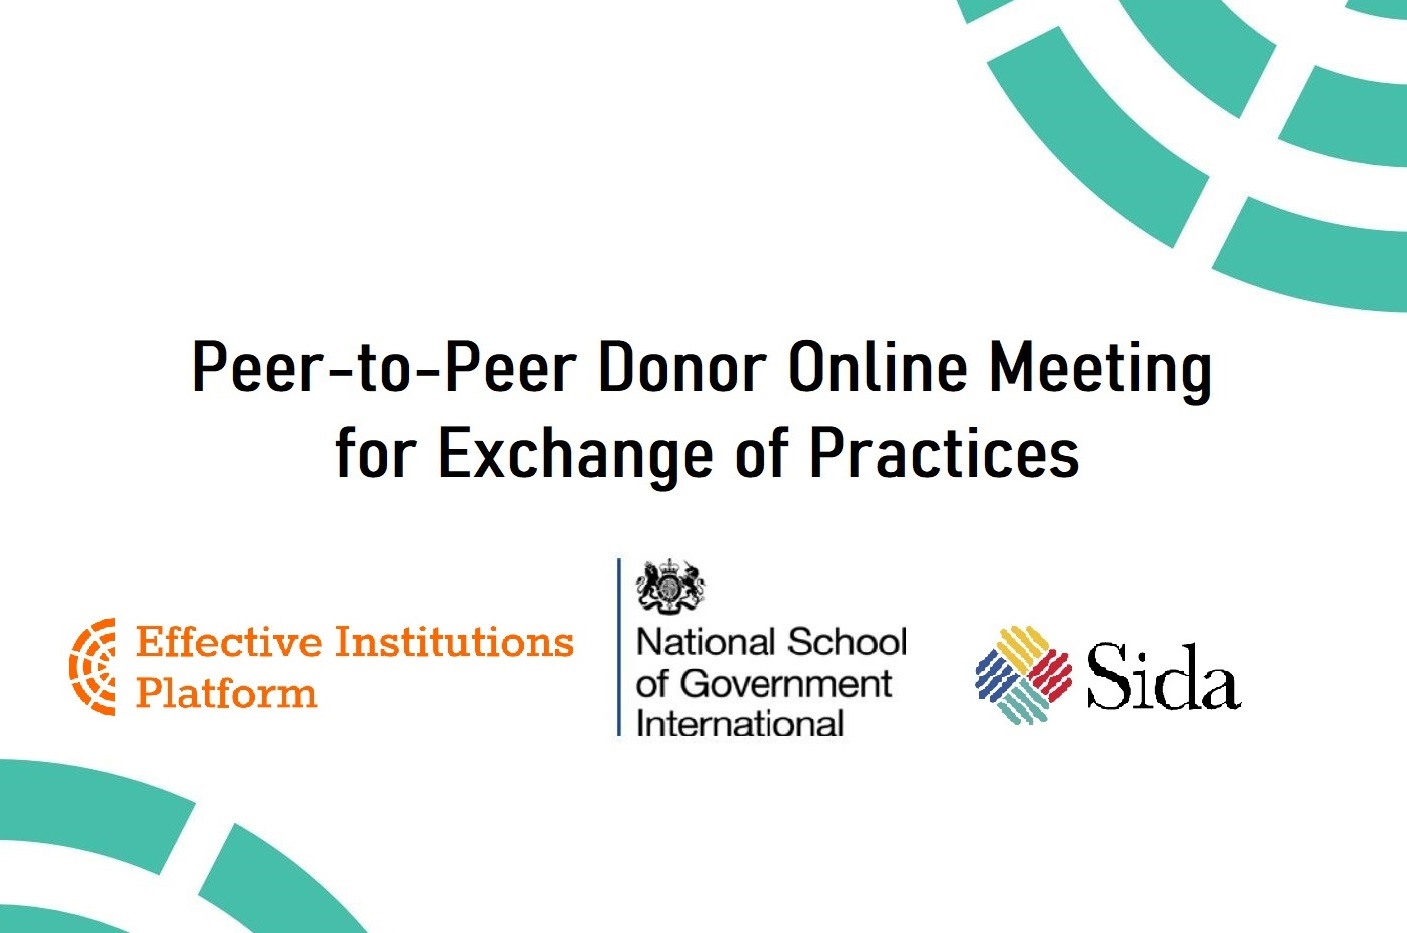 ACSH participated at the Peer-to-Peer Donors’ Learning online meeting